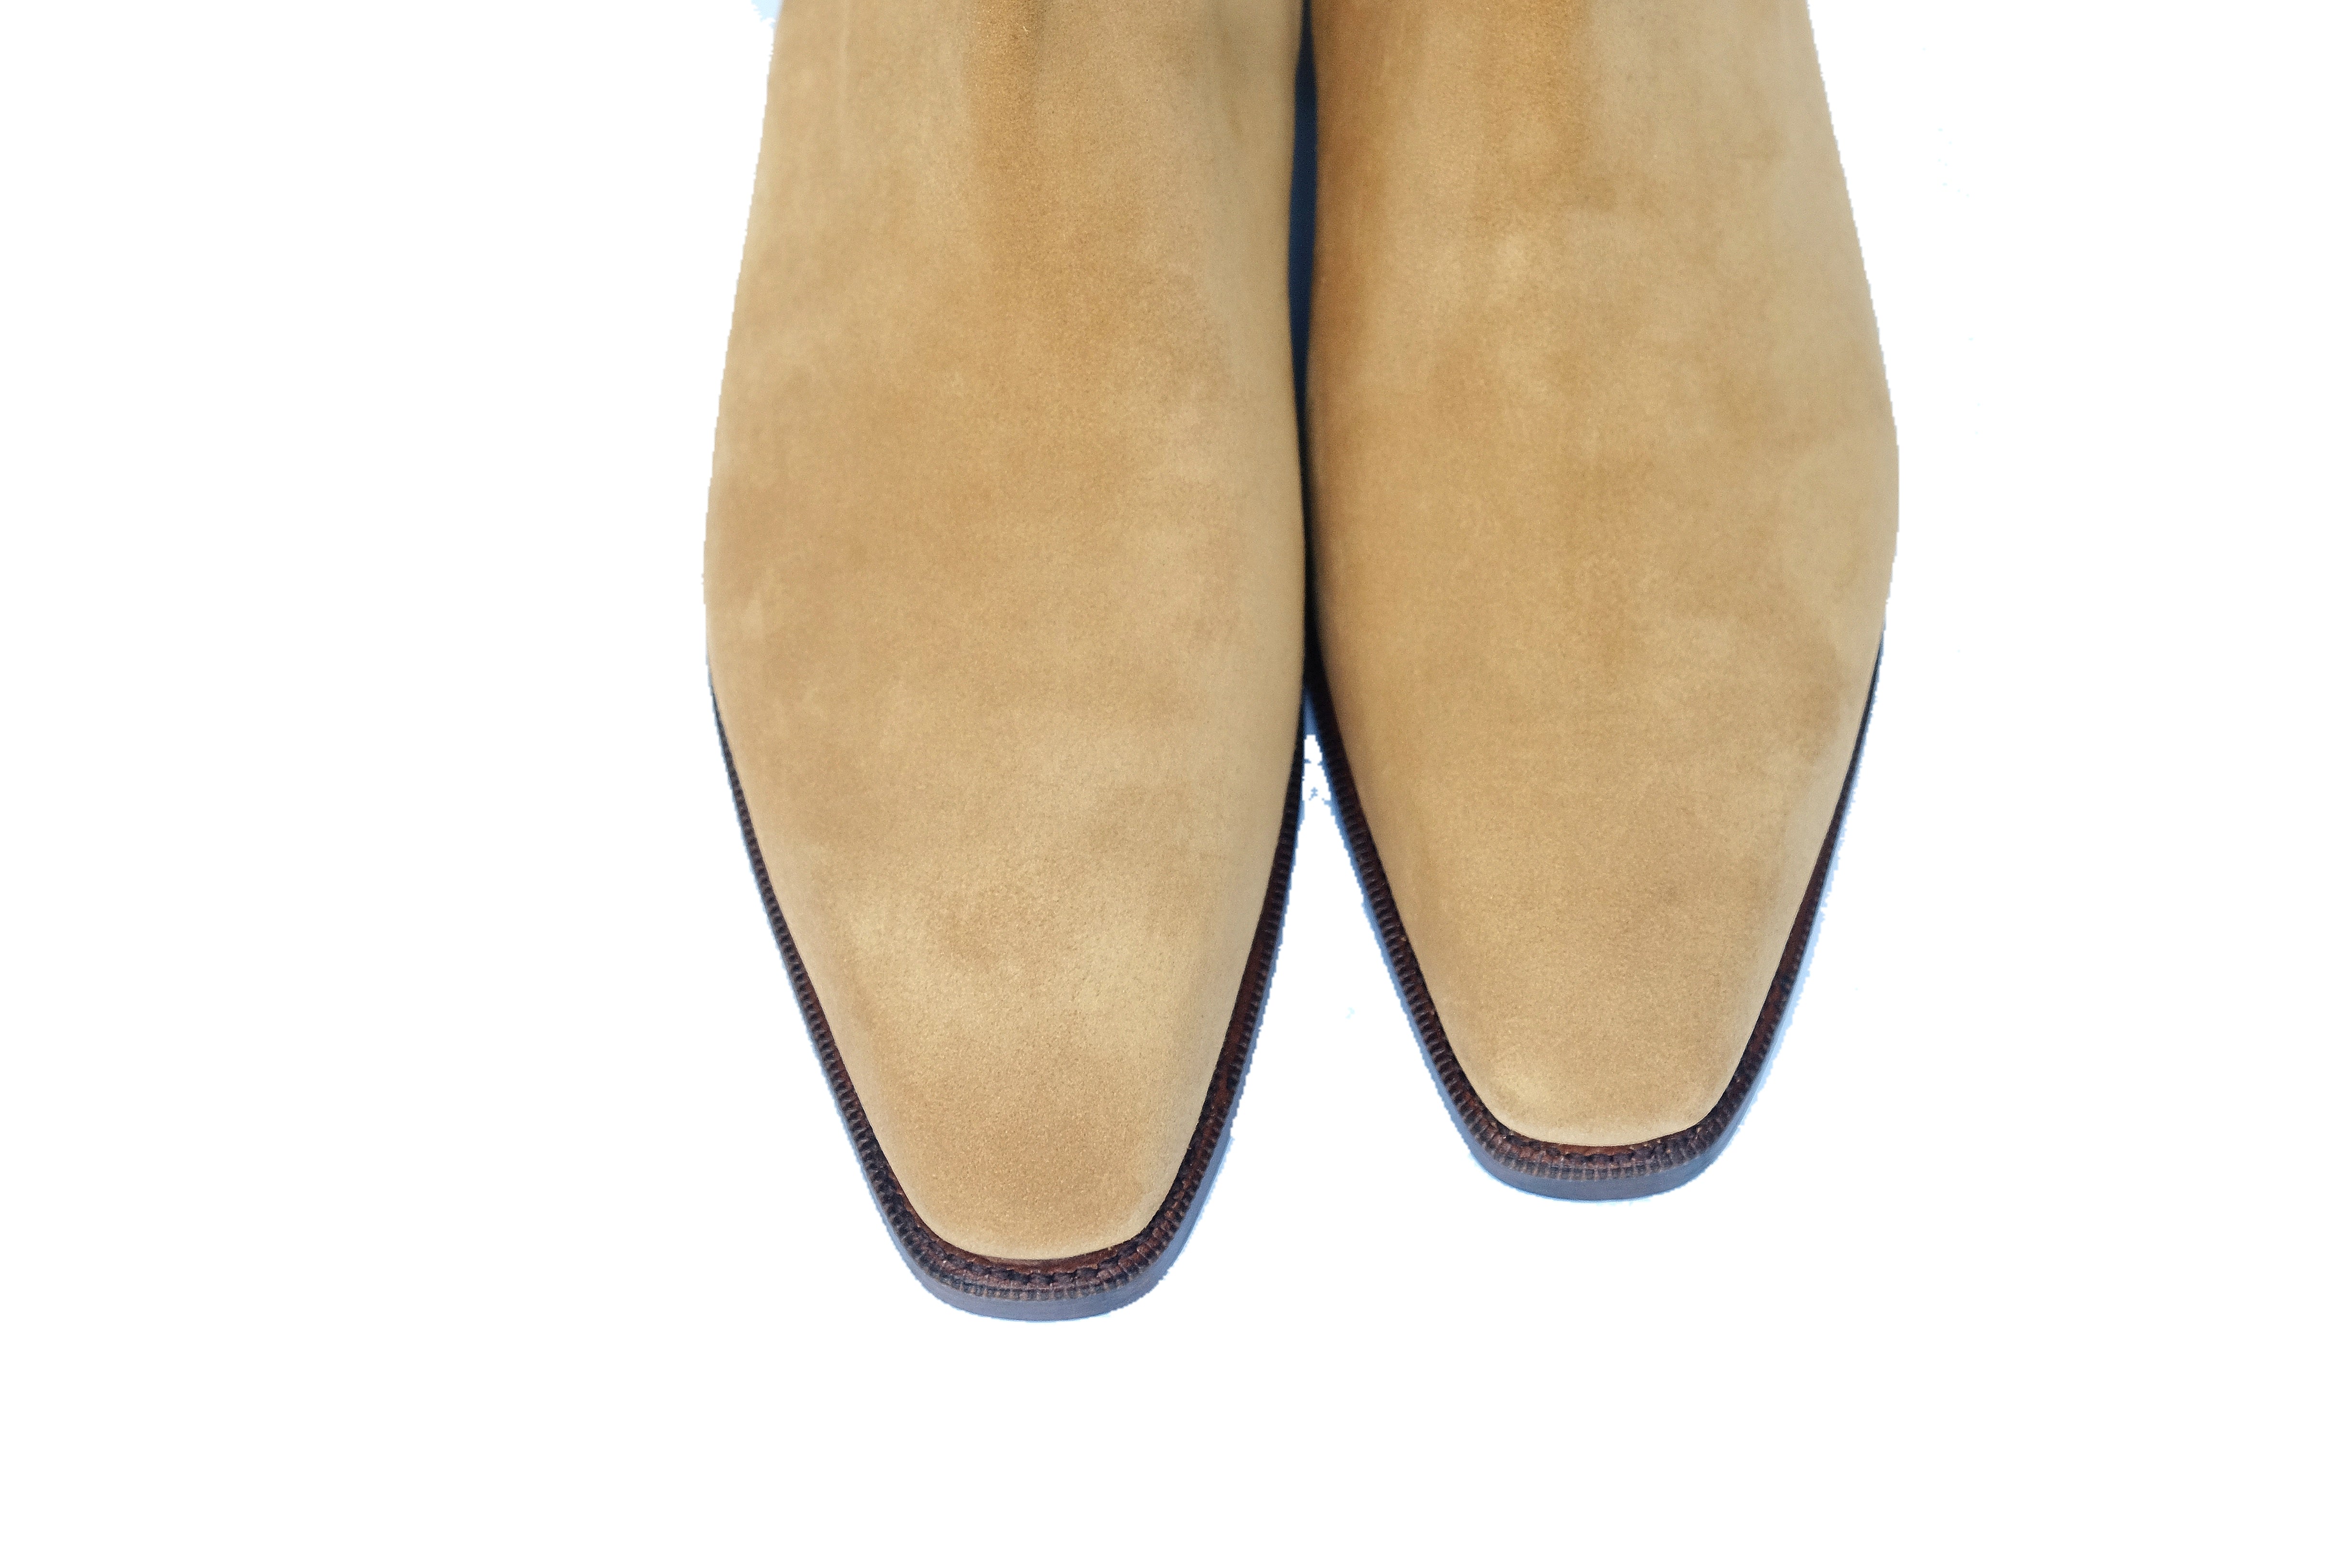 Genesee - MTO - Sand Suede - MGF Last - Double Leather Sole